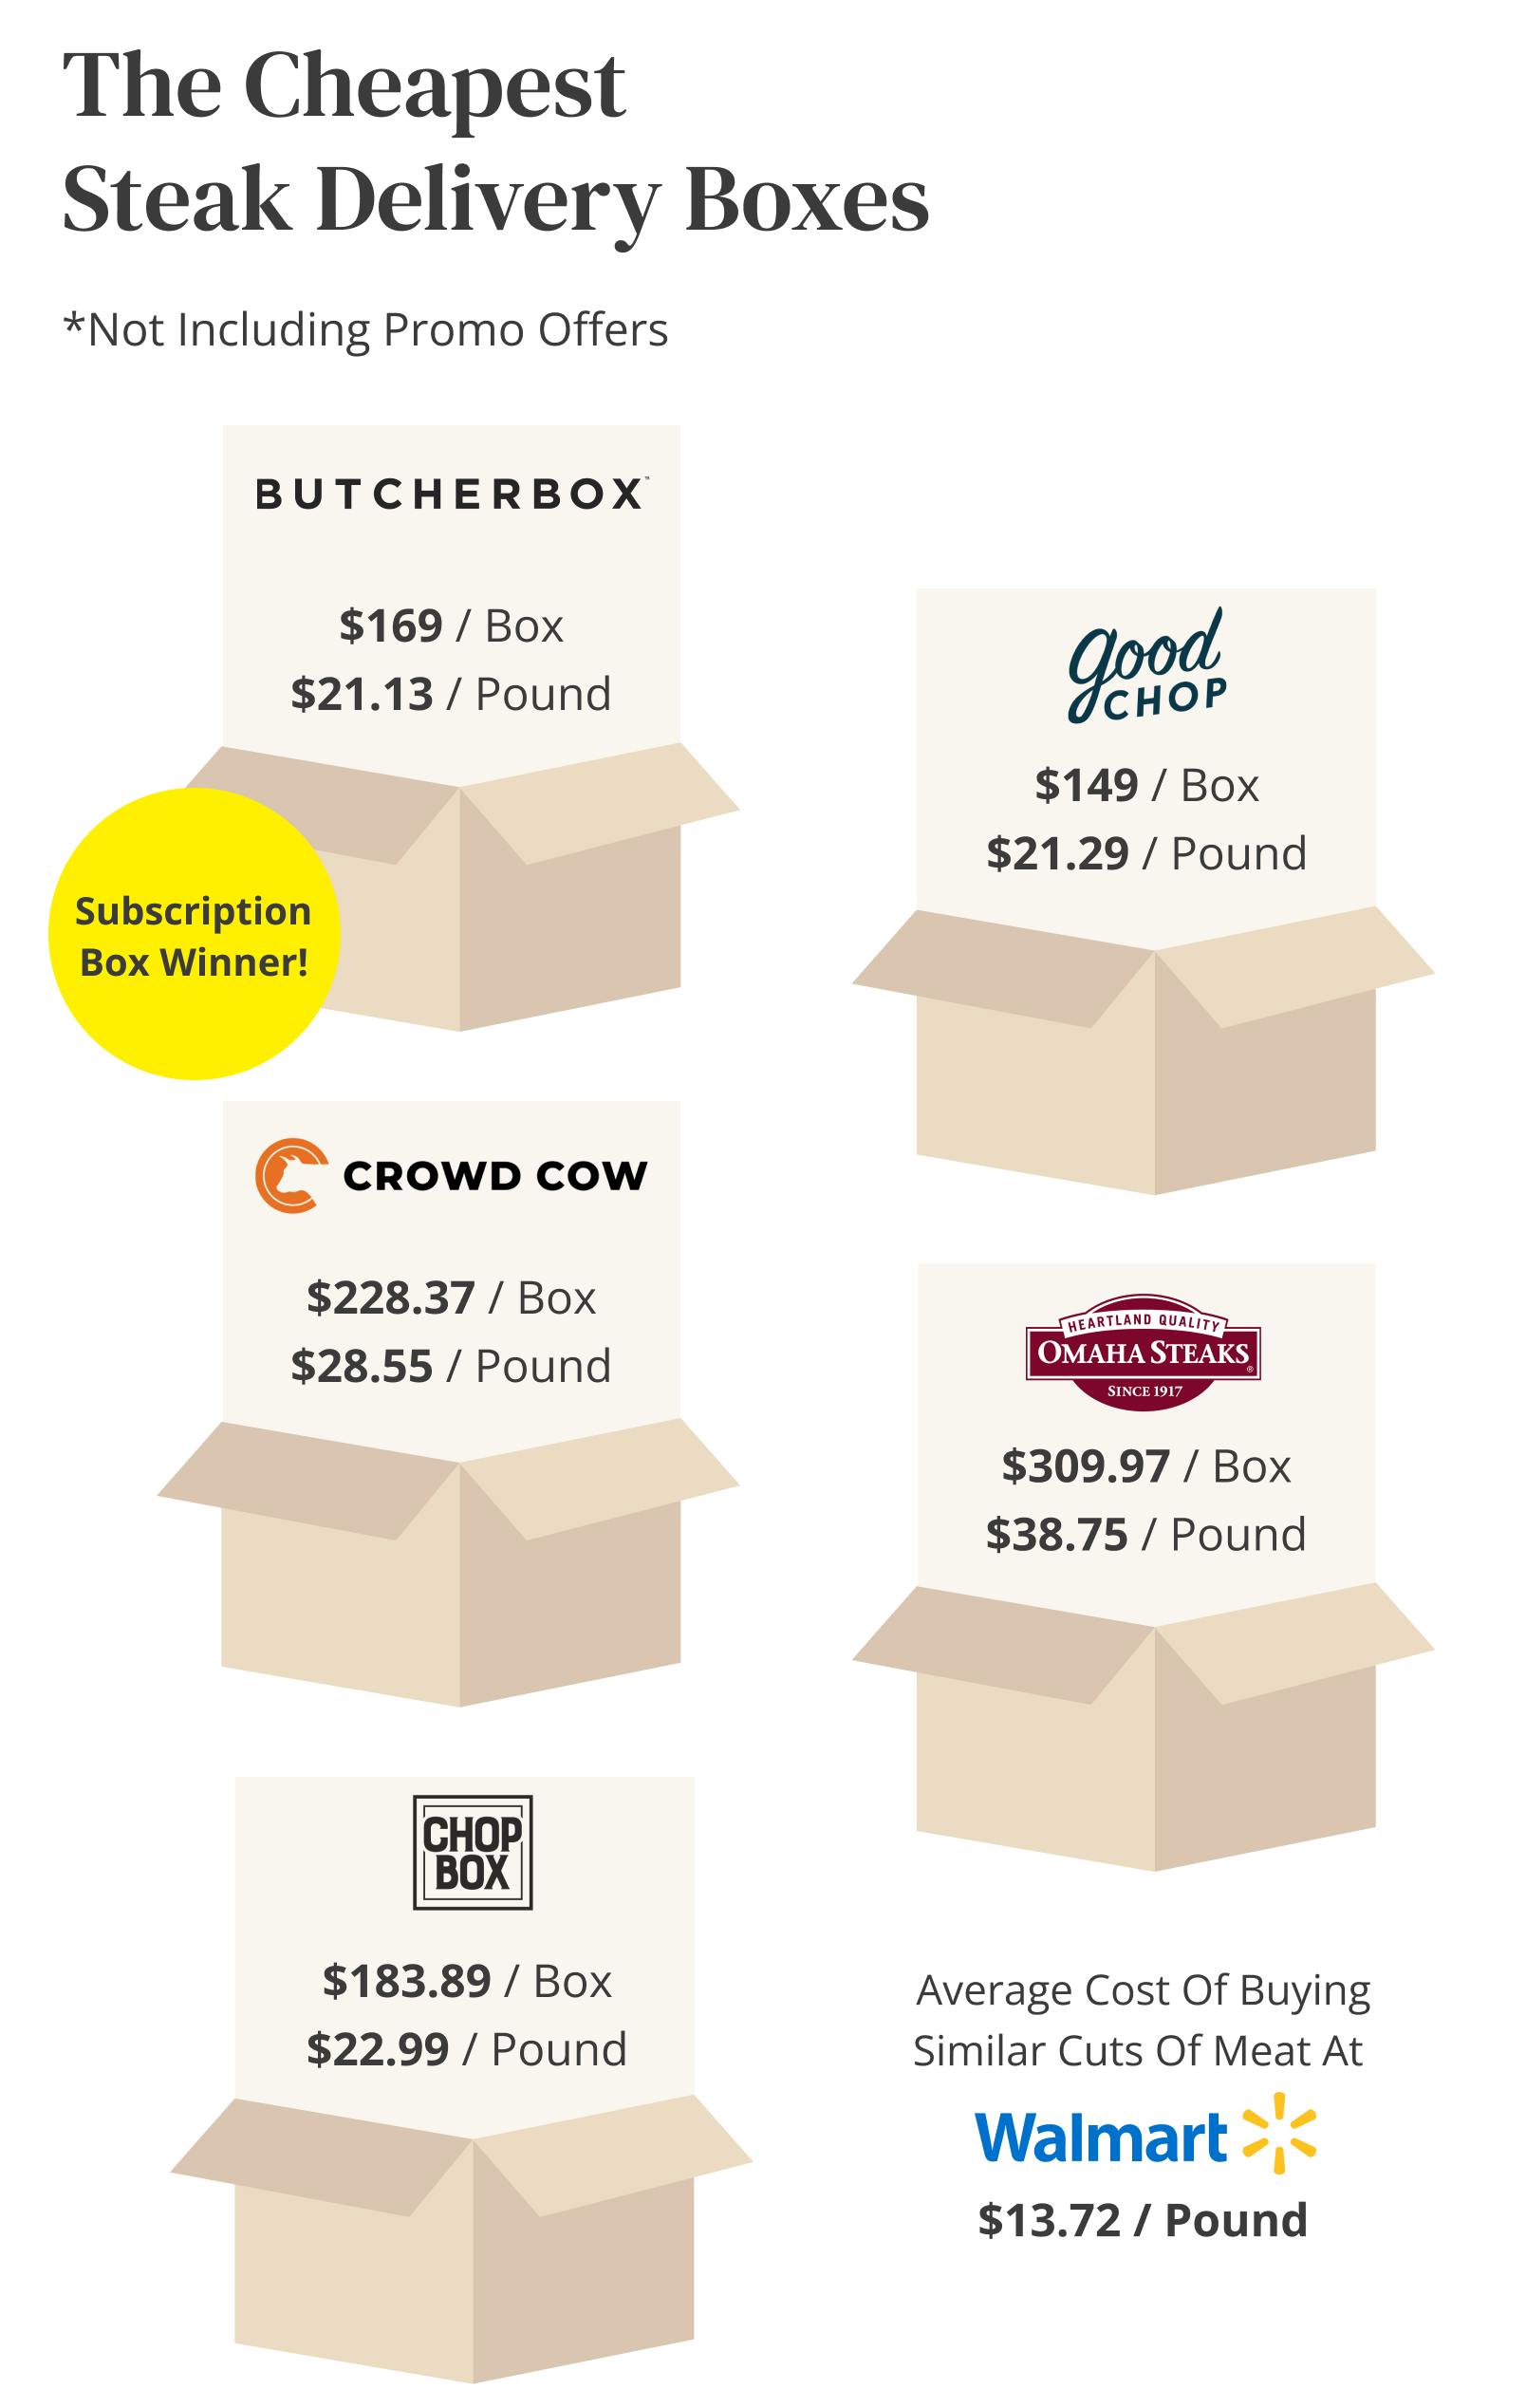 A graphic showing the price per pound for steak from different delivery services